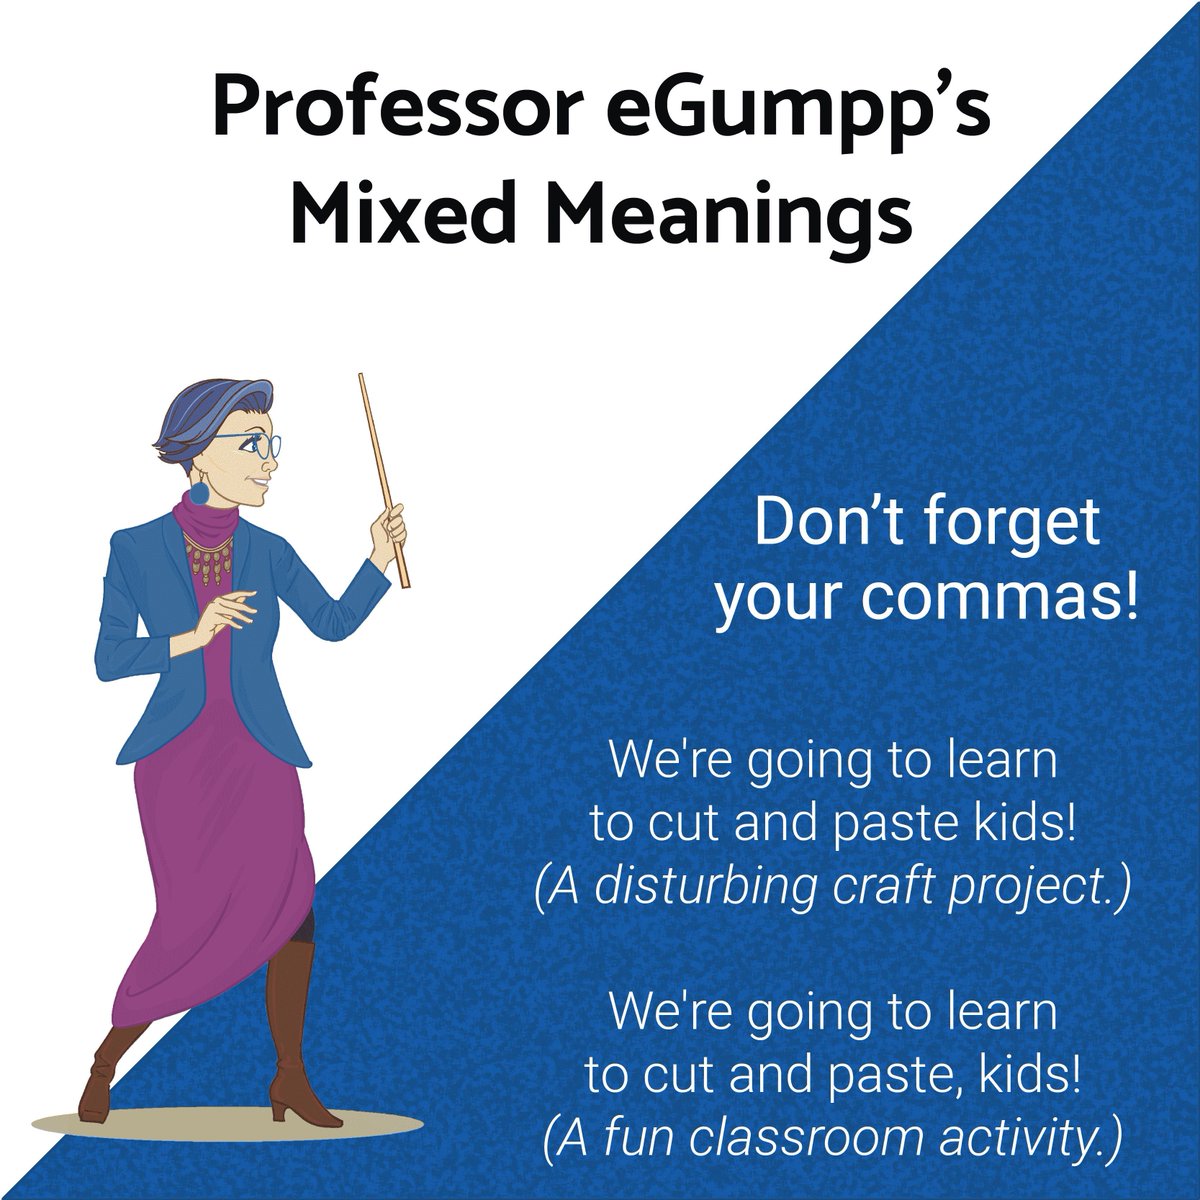 Professor eGumpp’s Mixed Meanings:
Punctuation can change the meaning of your sentence.

#MixedMeaningsMonday #Grammar #English #LearnEnglish #EnglishGrammar #EnglishLanguage #EnglishTips #GrammarTips #EnglishClass #EnglishOnline #Writing #Punctuation #MisplacedModifiers #EGUMPP